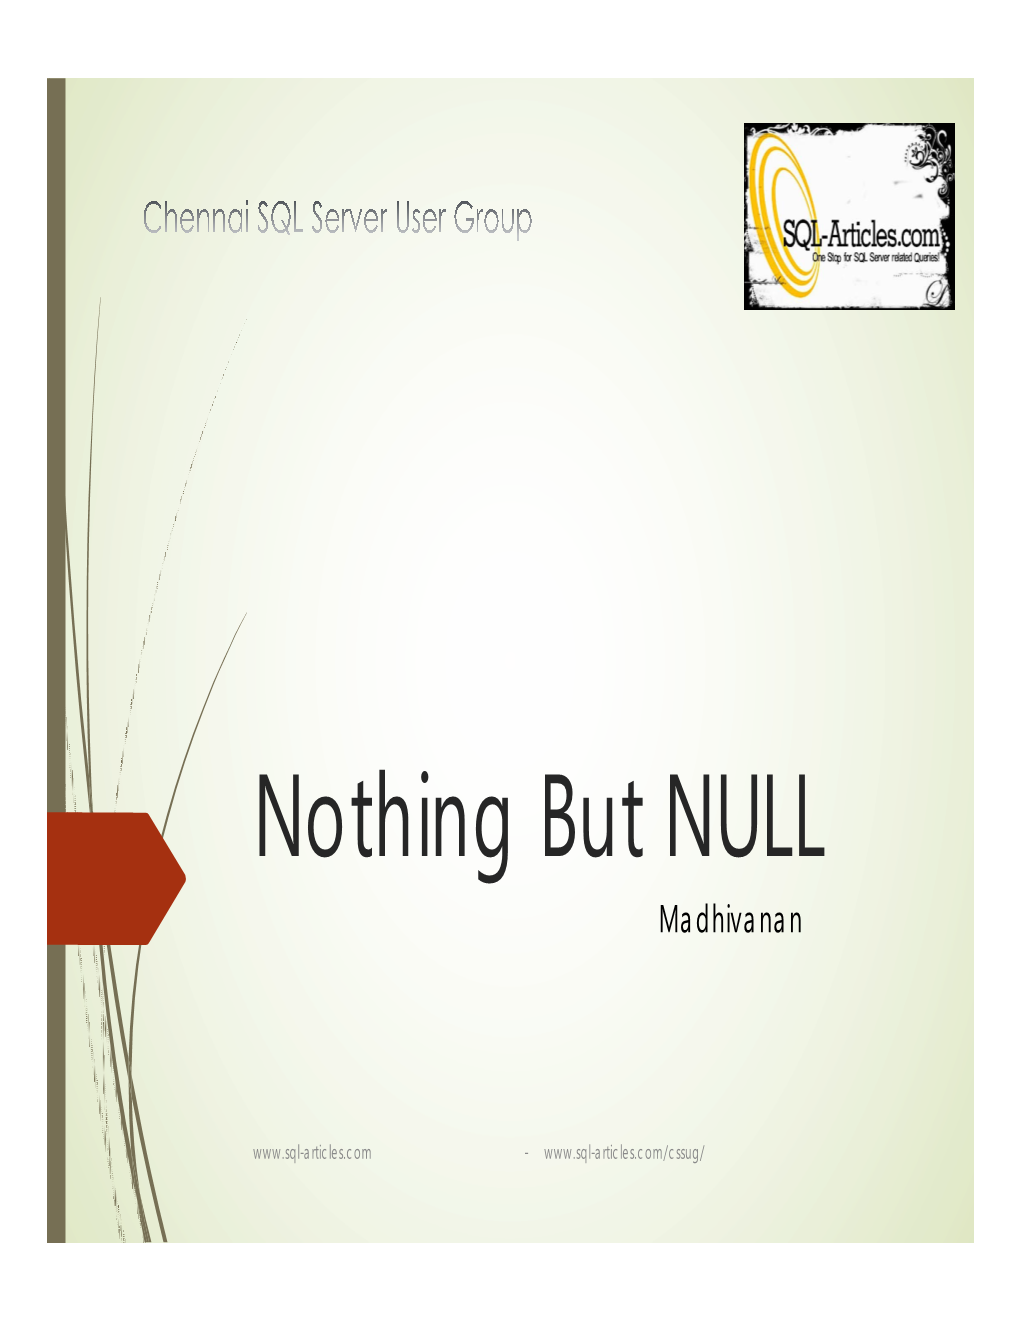 Nothing but NULL Madhivanan